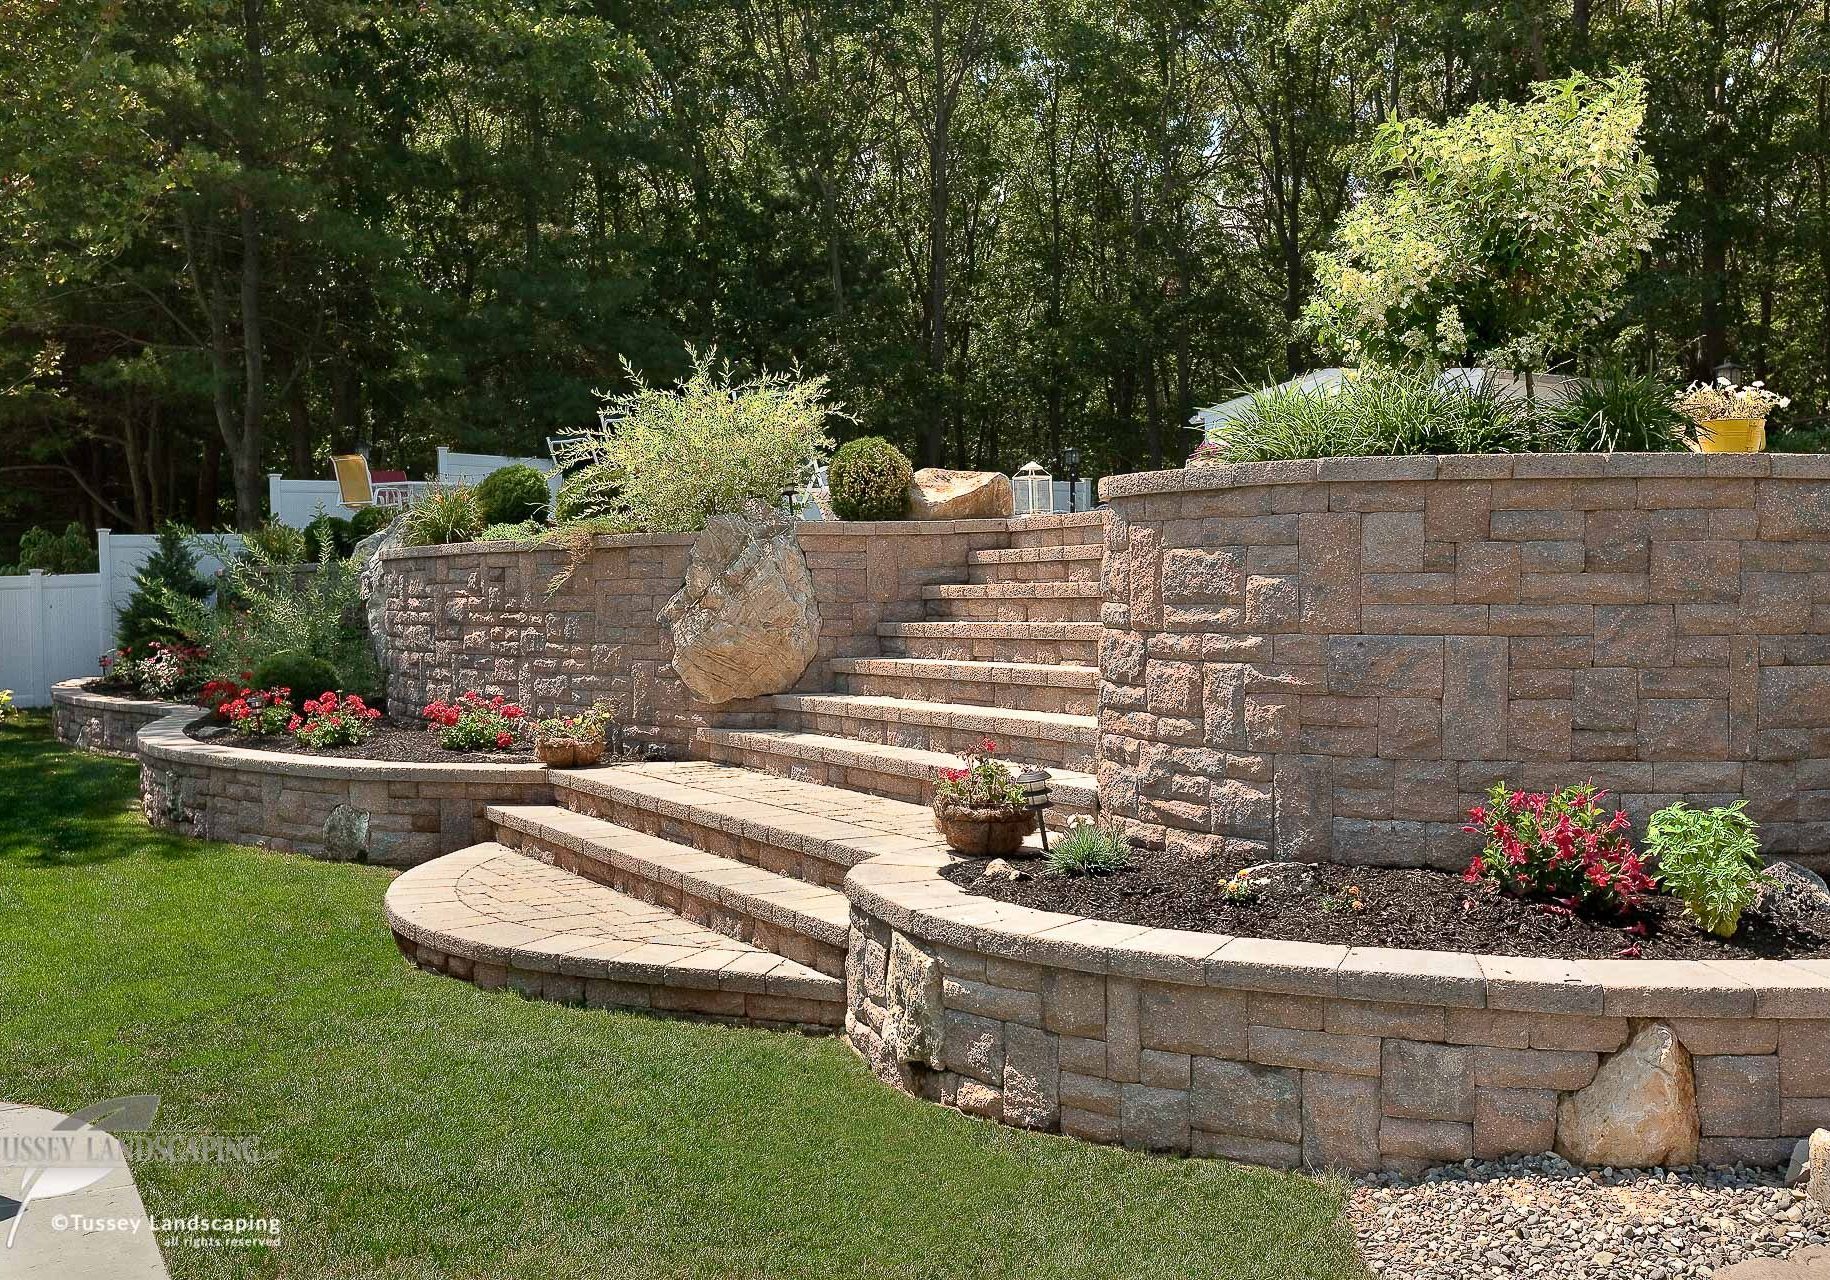 A stone retaining wall in a backyard.